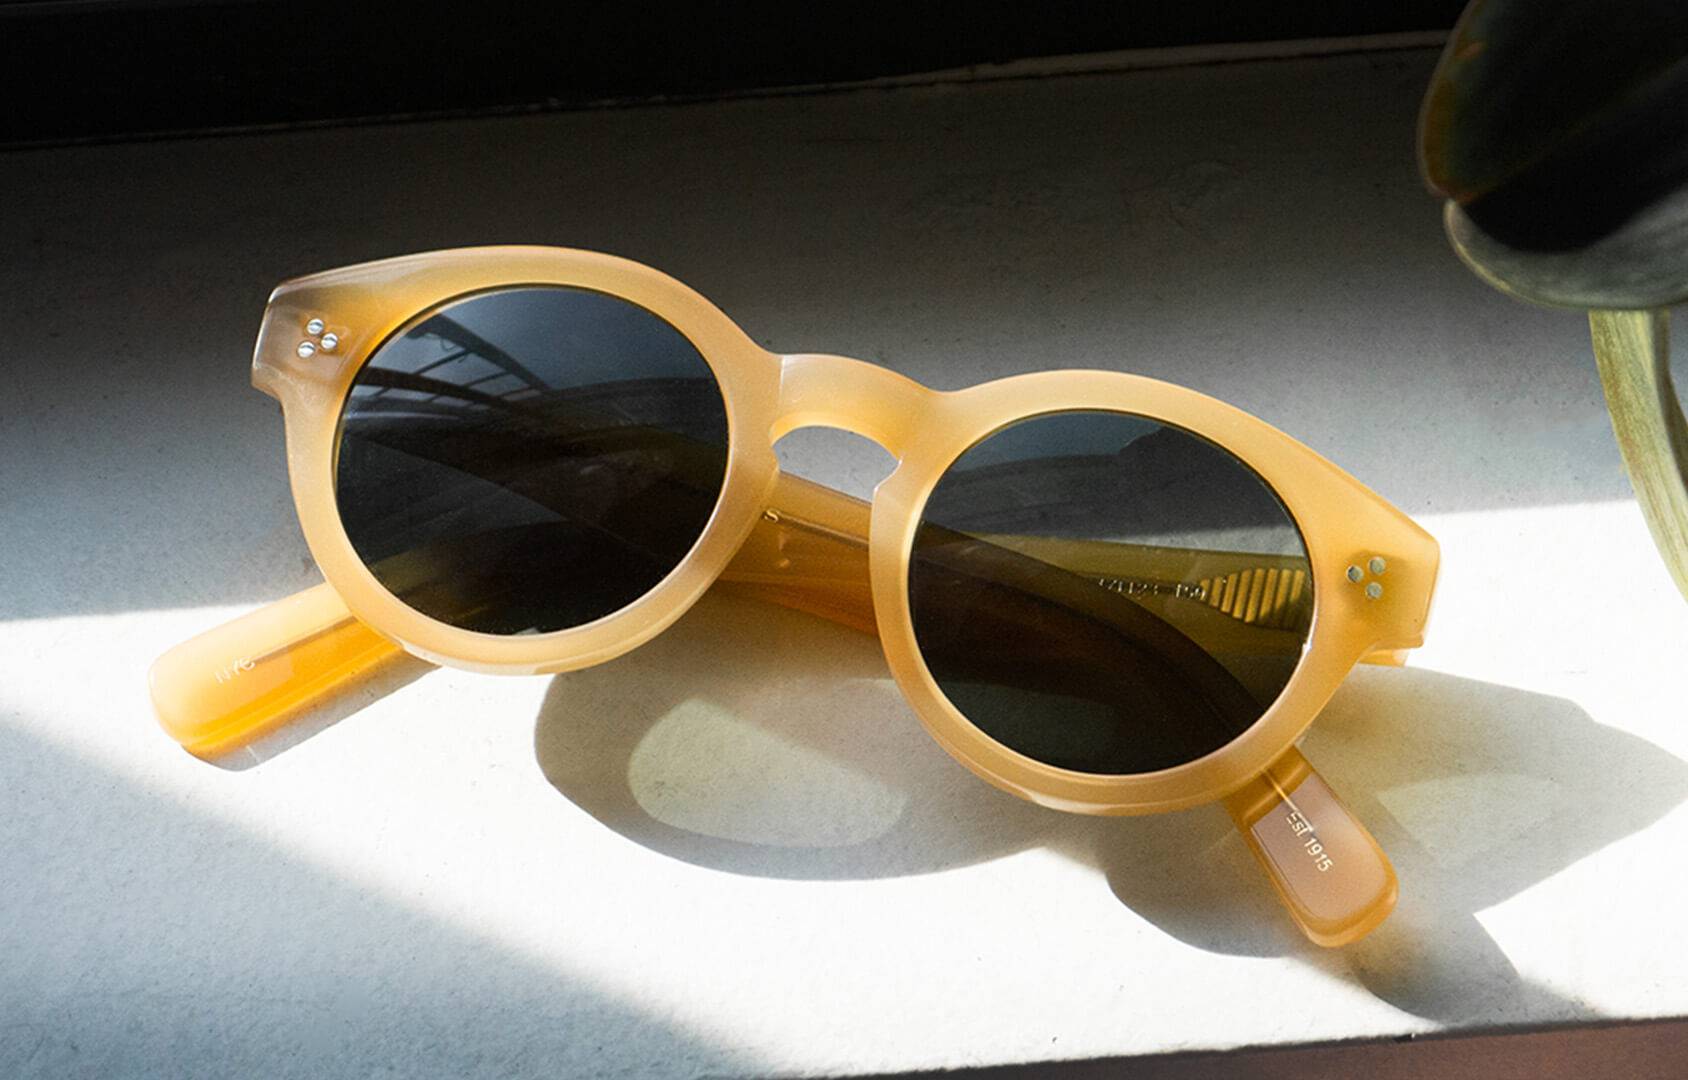 Turn up the heat with The GRUNYA SUN in Goldenrod, a Harper's Bazaar IT favorite for the summer!